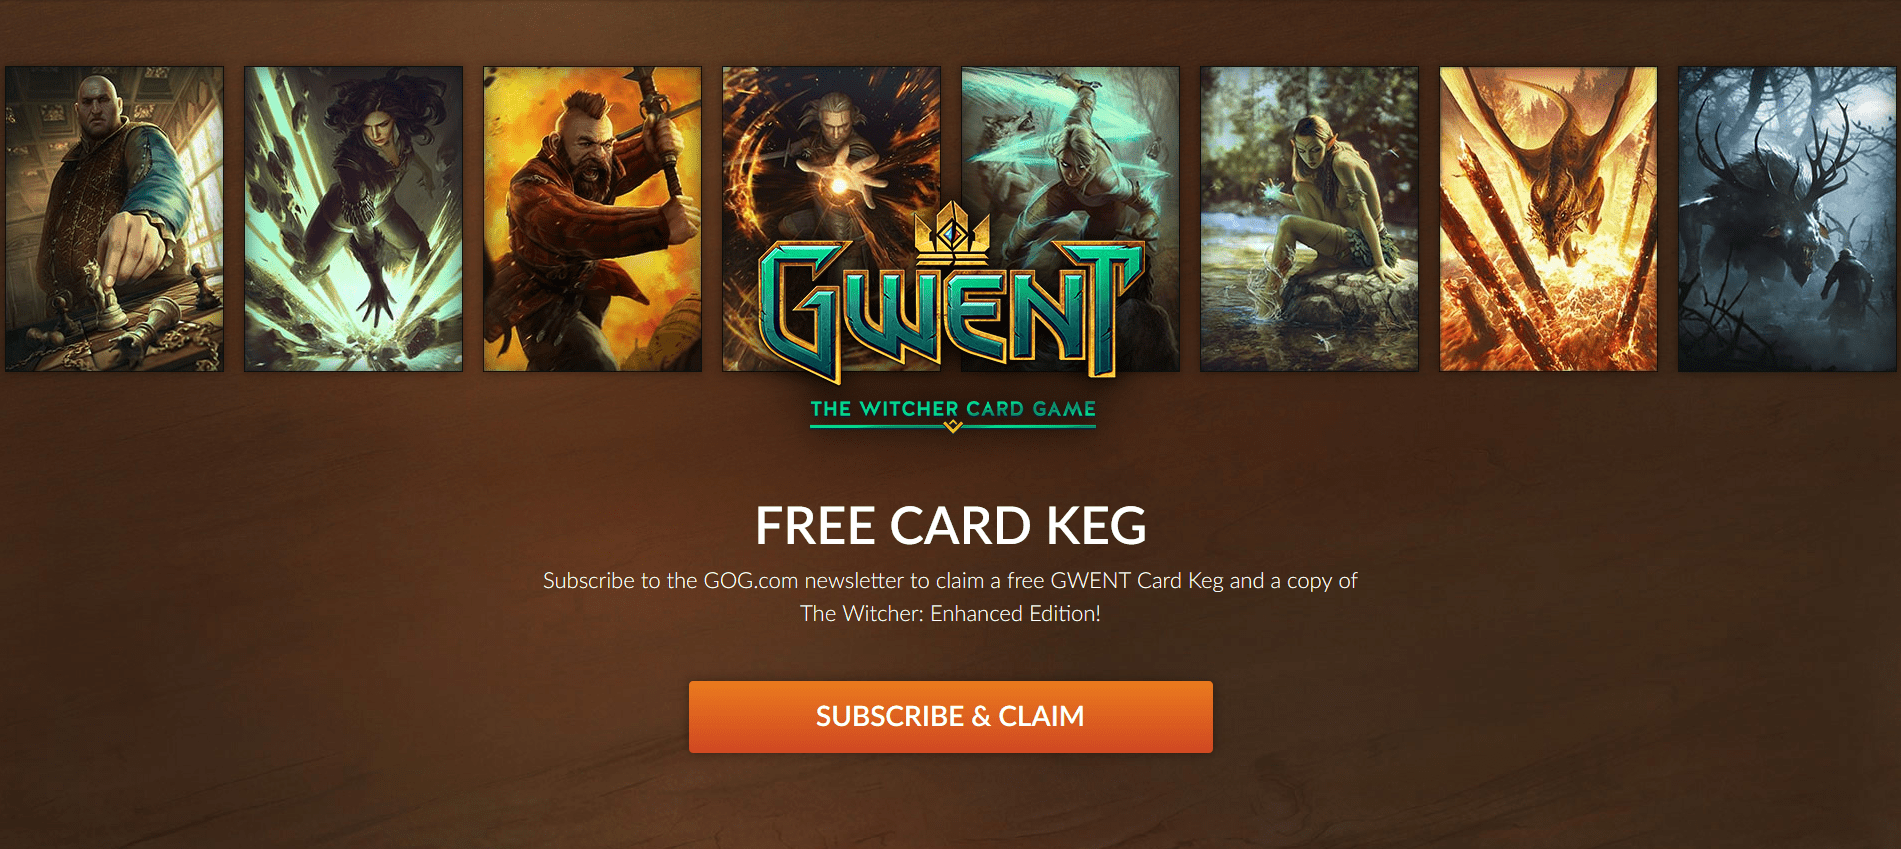 Get GWENT Card Keg and The Witcher: Enhanced Edition Free